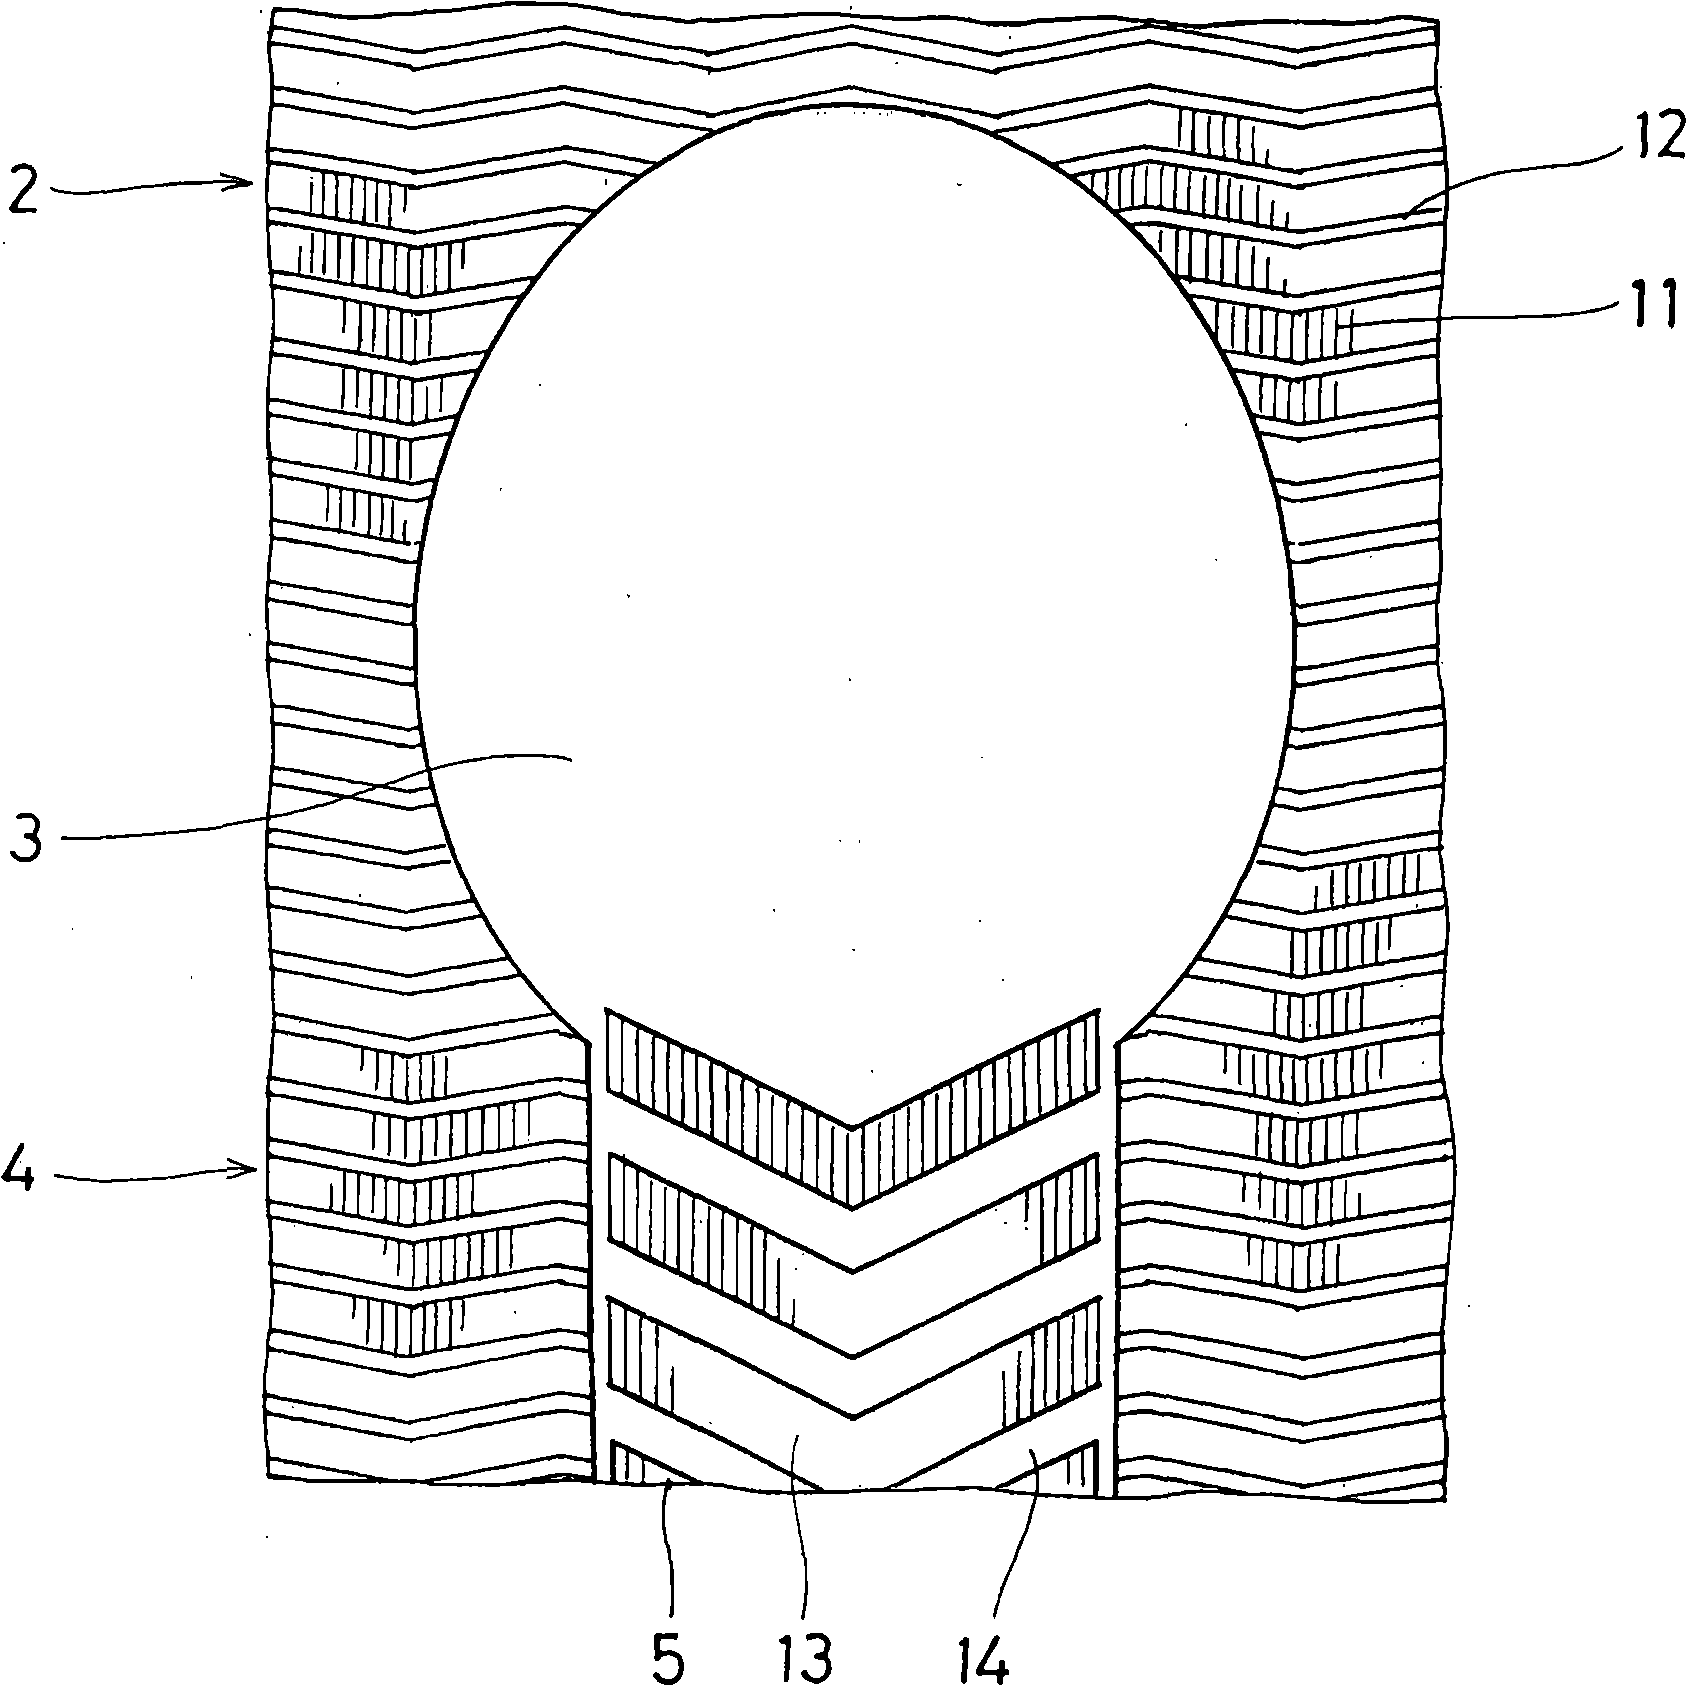 Sockes and production method thereof